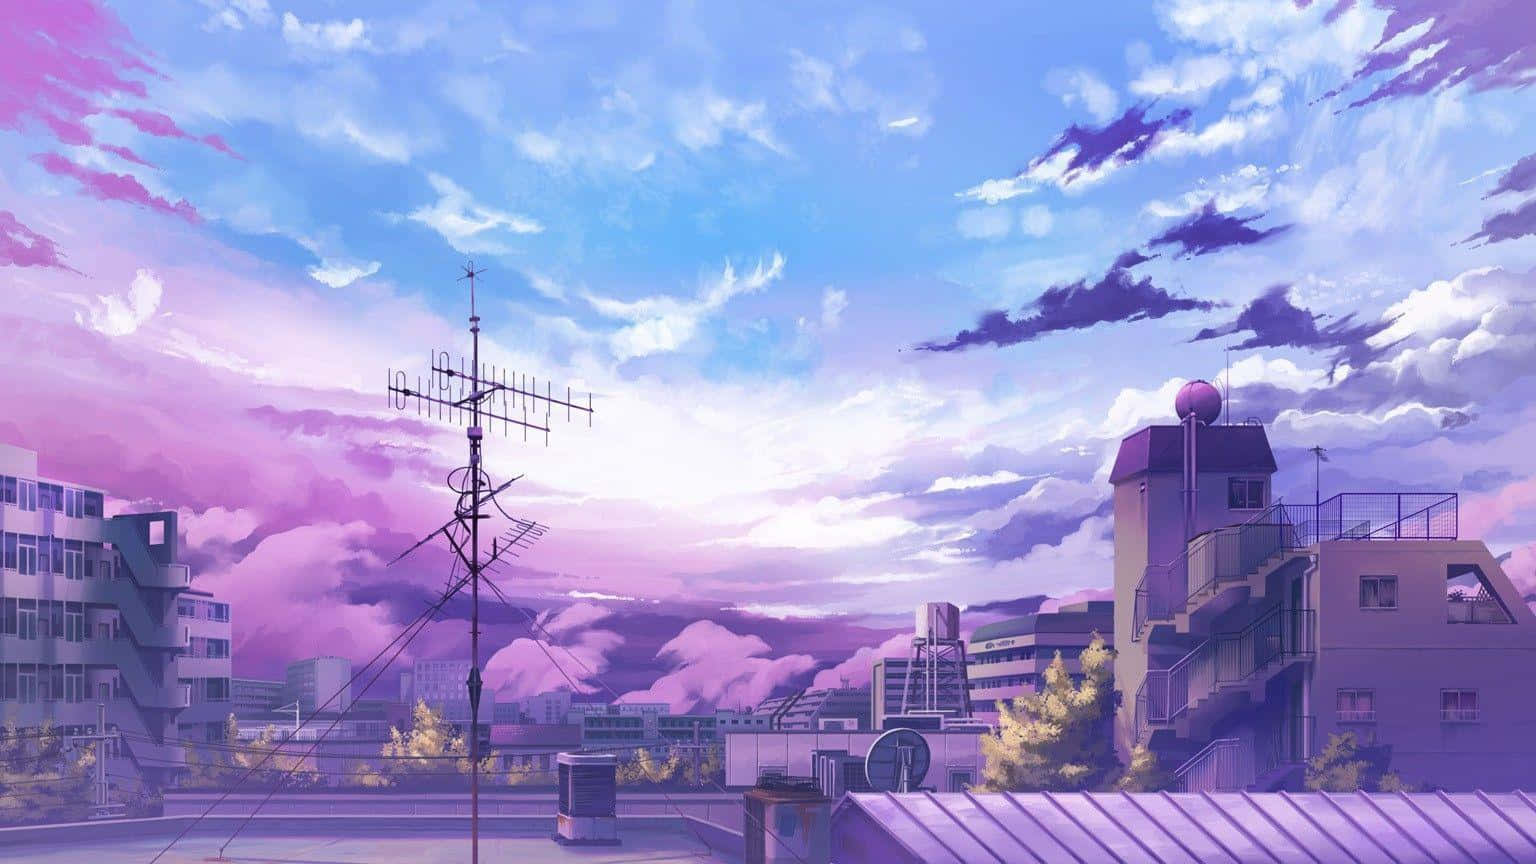 100+] Purple Aesthetic Anime Backgrounds | Wallpapers.com